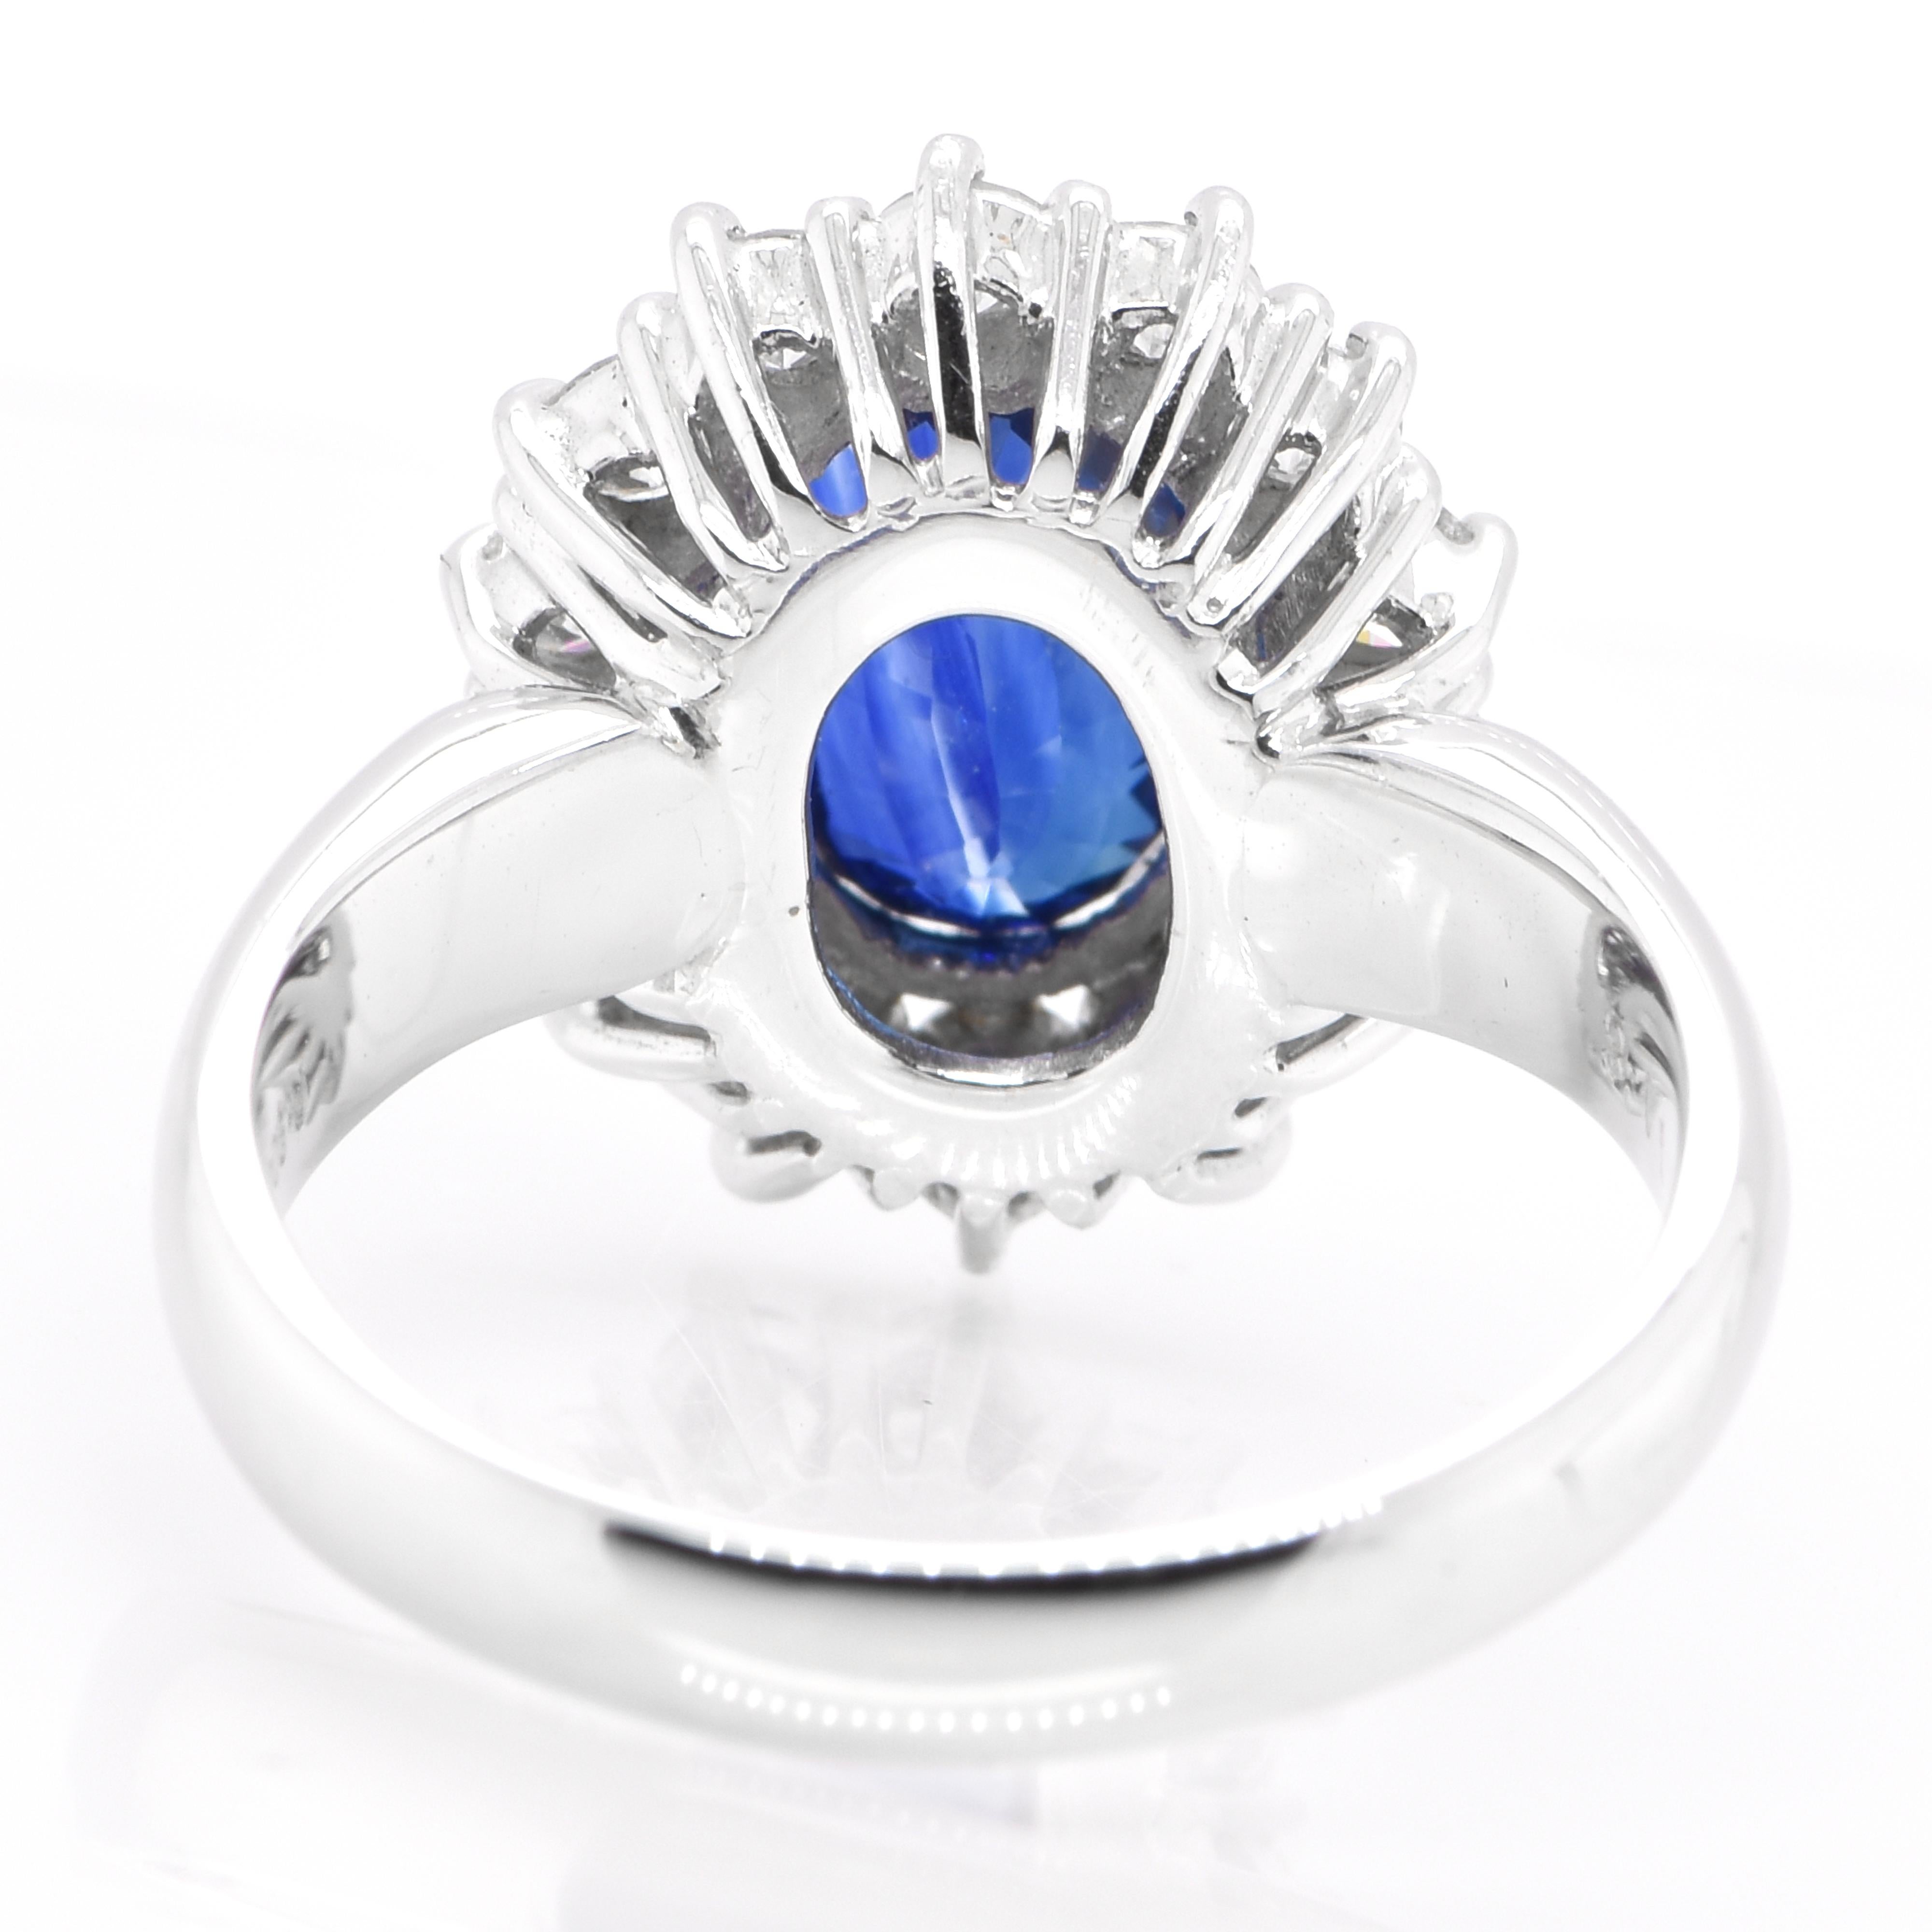 Women's AIG Certified 3.11 Carat Natural Unheated Blue Sapphire Ring Set in Platinum